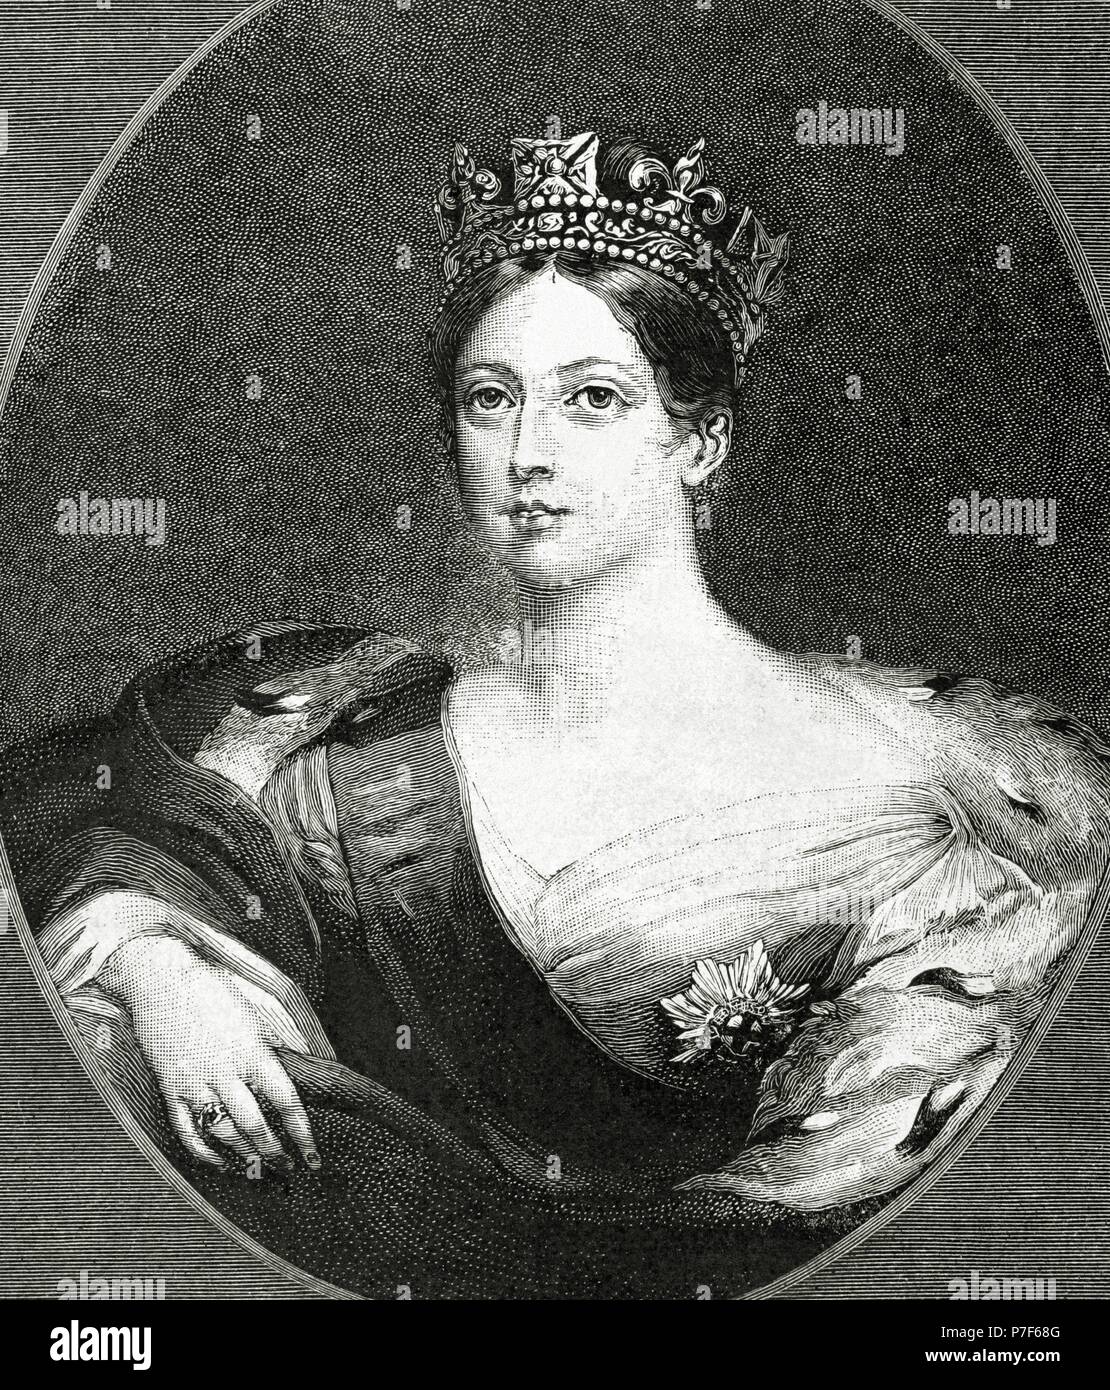 Queen Victoria (1819-1901). Queen of the United Kingdom of Great Britain and Ireland and Empress of India. Engraving in the Almanac of The Illustration, 1888. Stock Photo